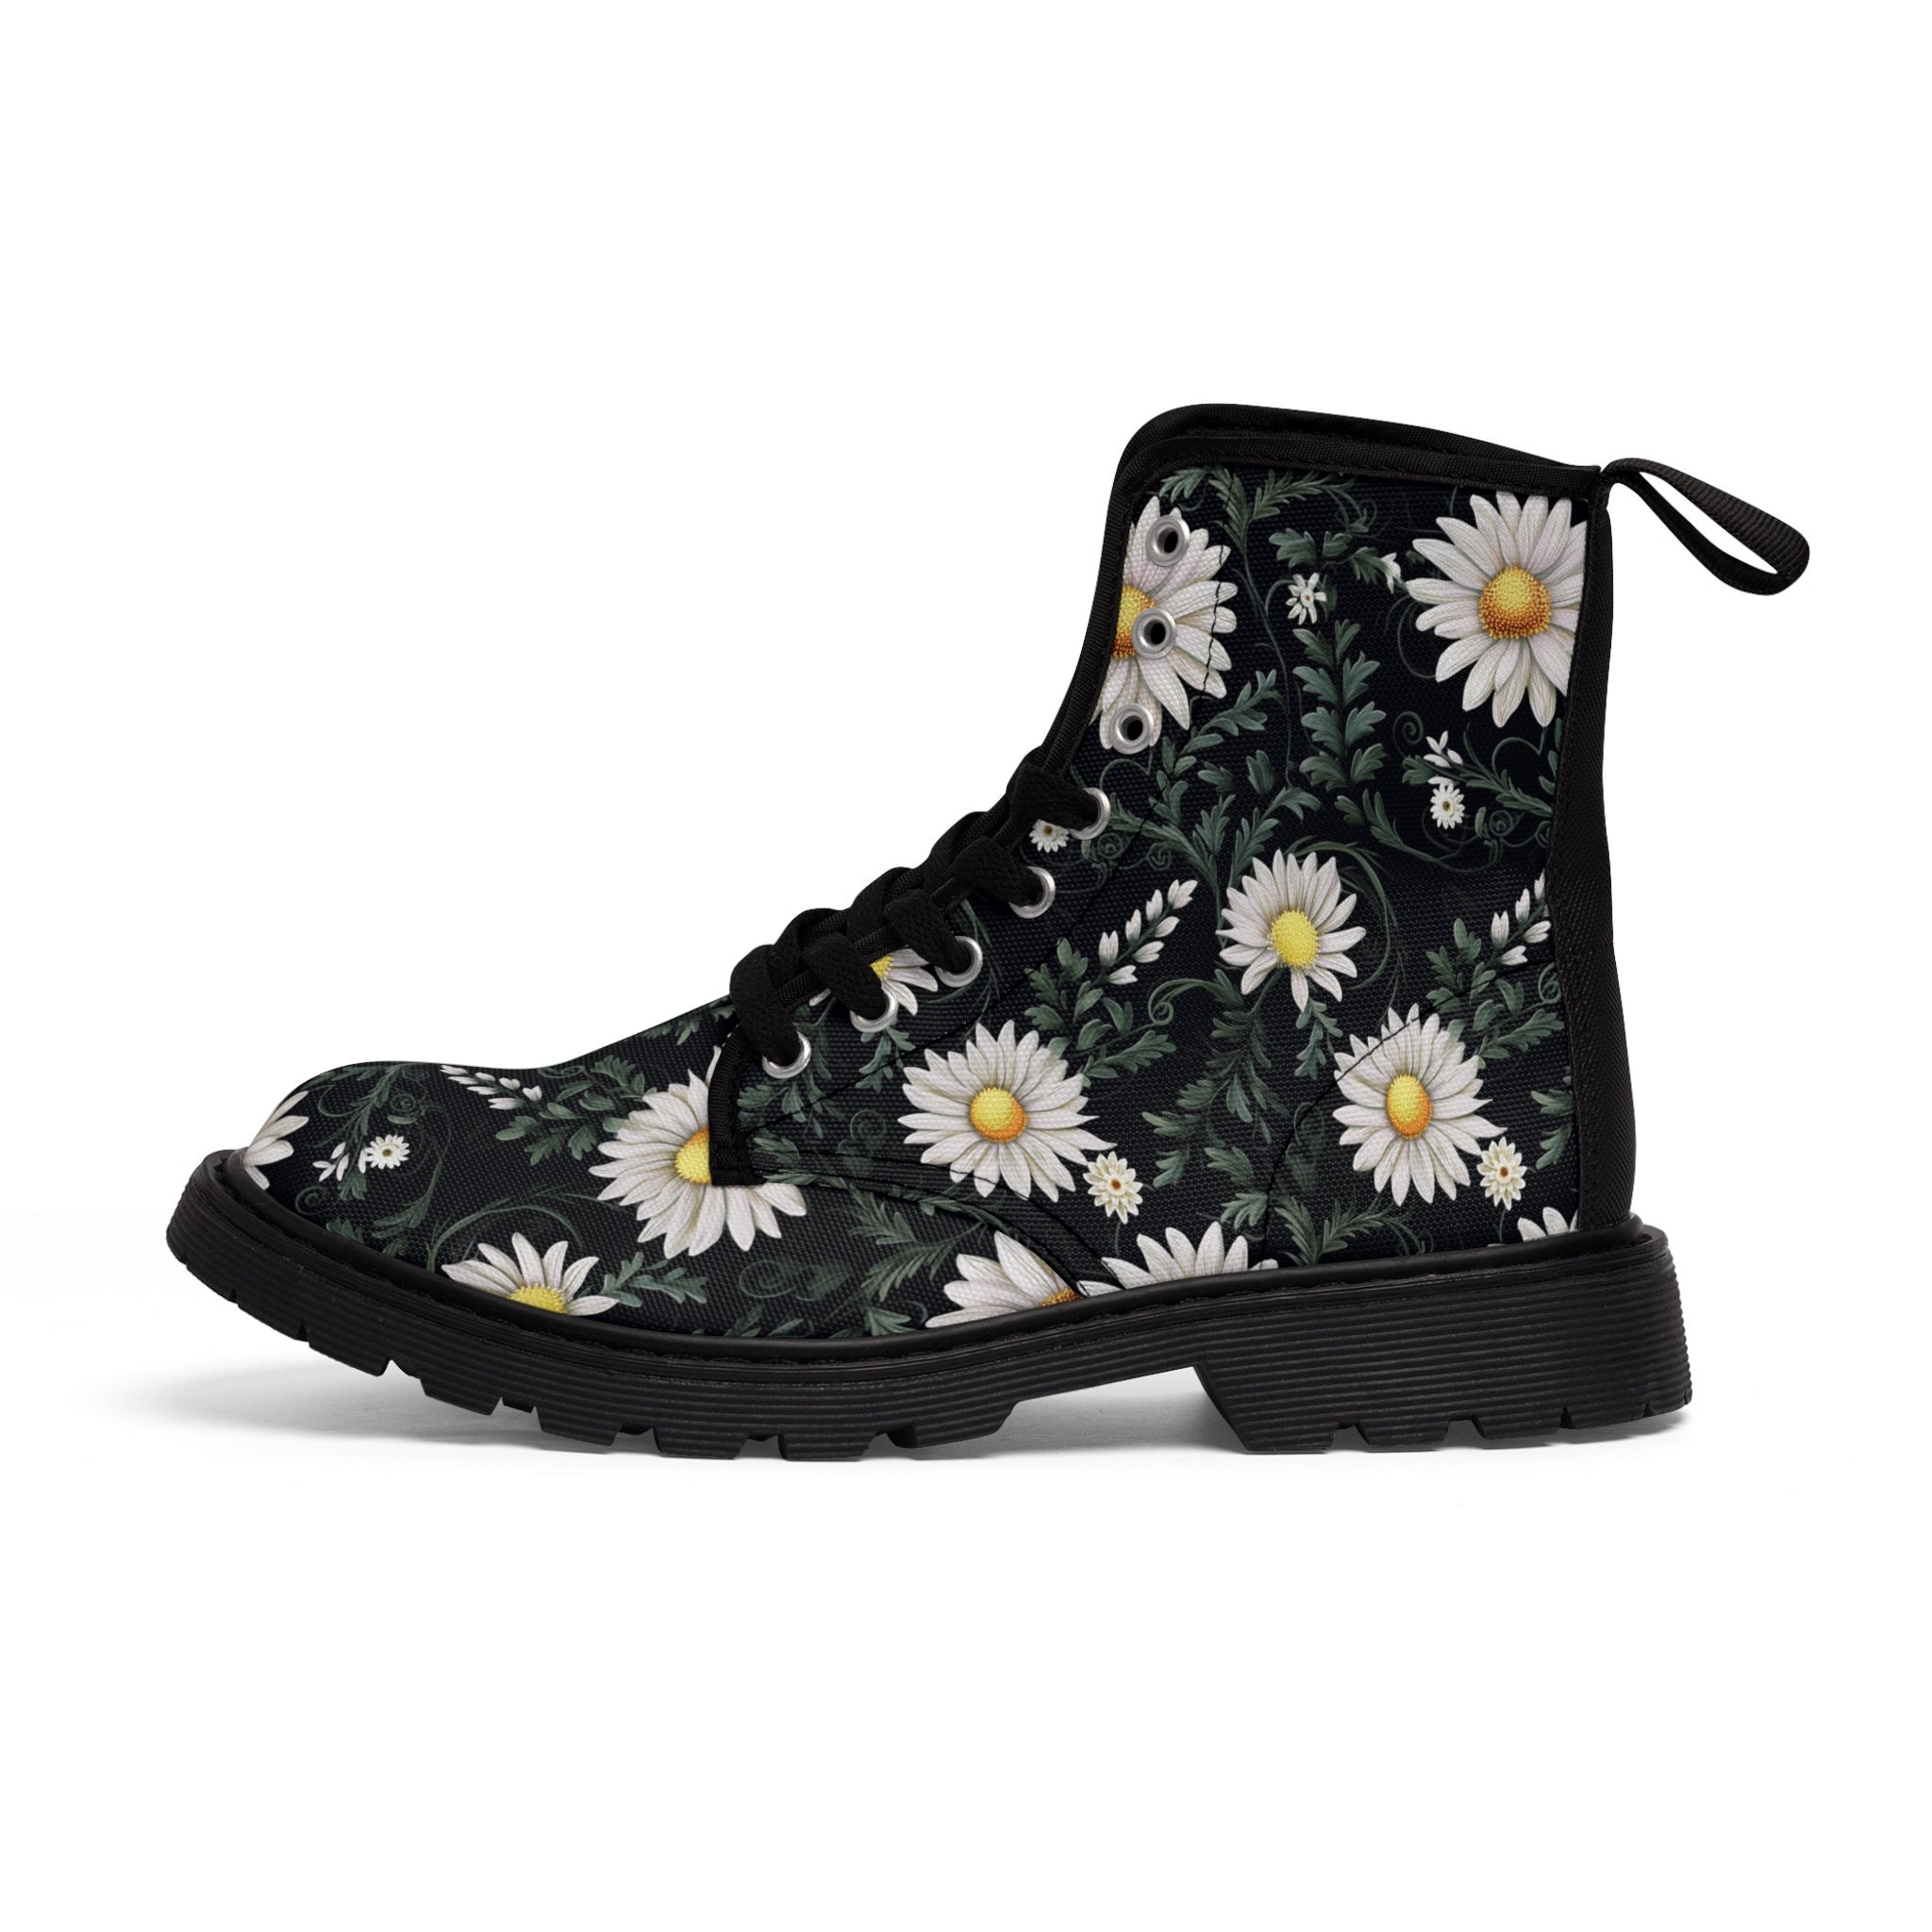 Garitha Flowers on Black Background Boots to Shoes Size EU - Etsy